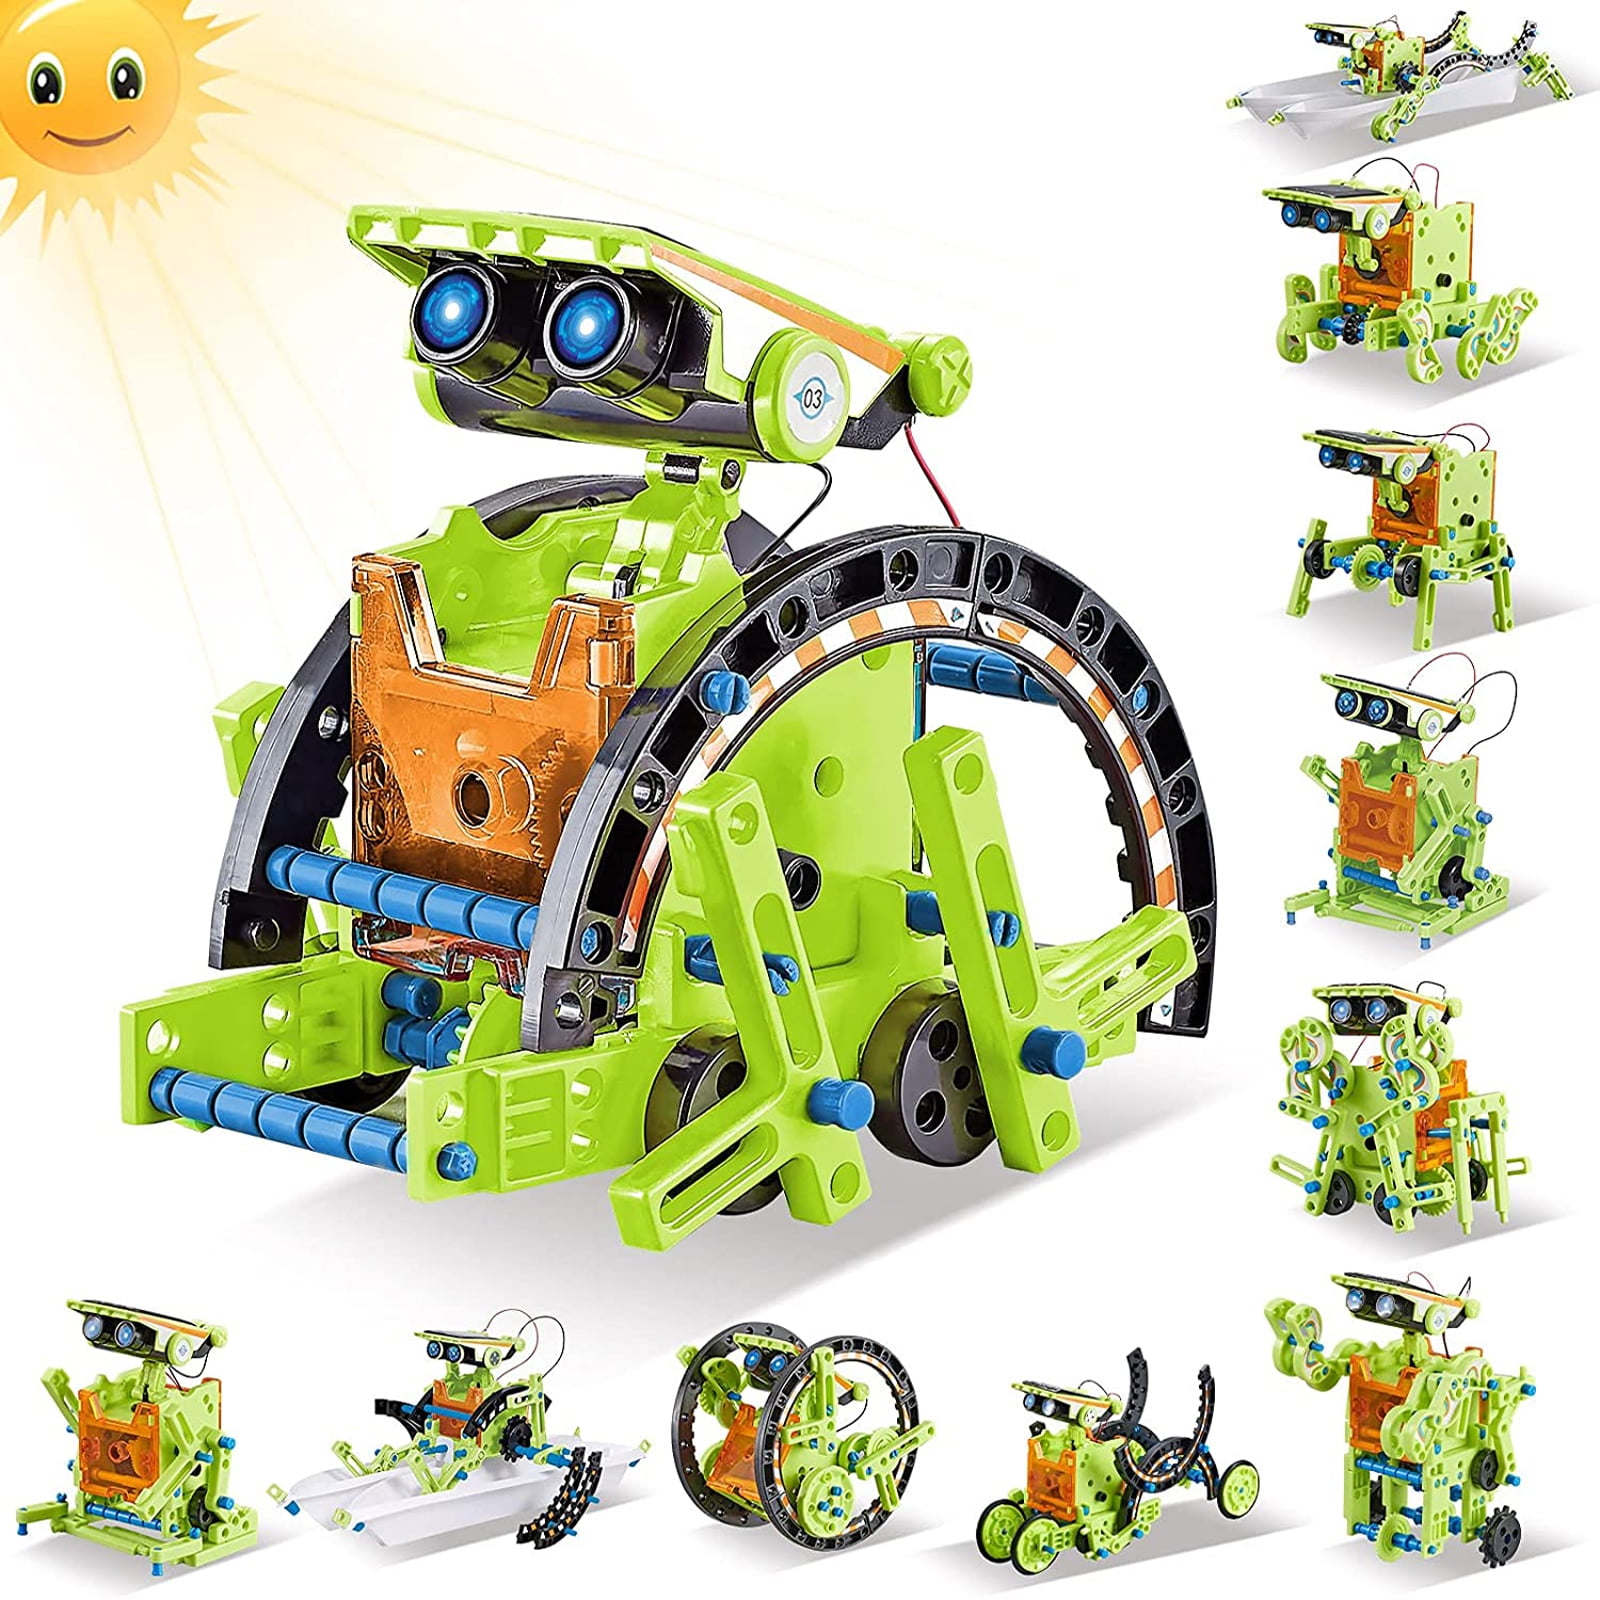 Robot Kit Stem 12 in 1 Solar Robots Building Toys Science Kits for Boys Ages 8 1 